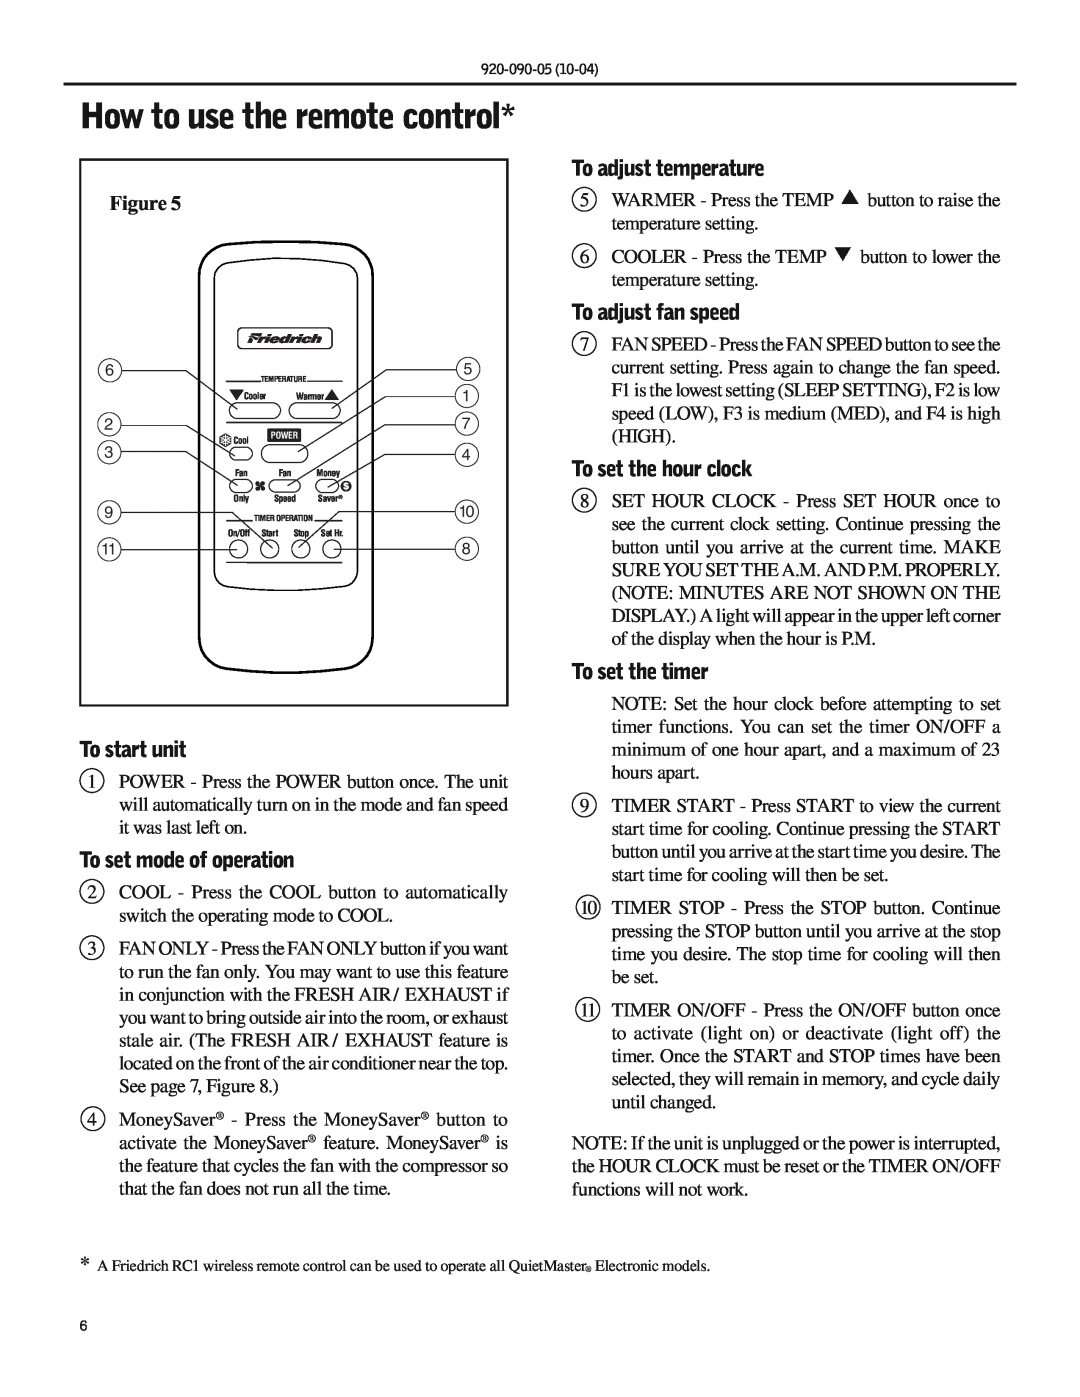 Friedrich SS09 manual How to use the remote control, To adjust temperature, To set the hour clock, To start unit 